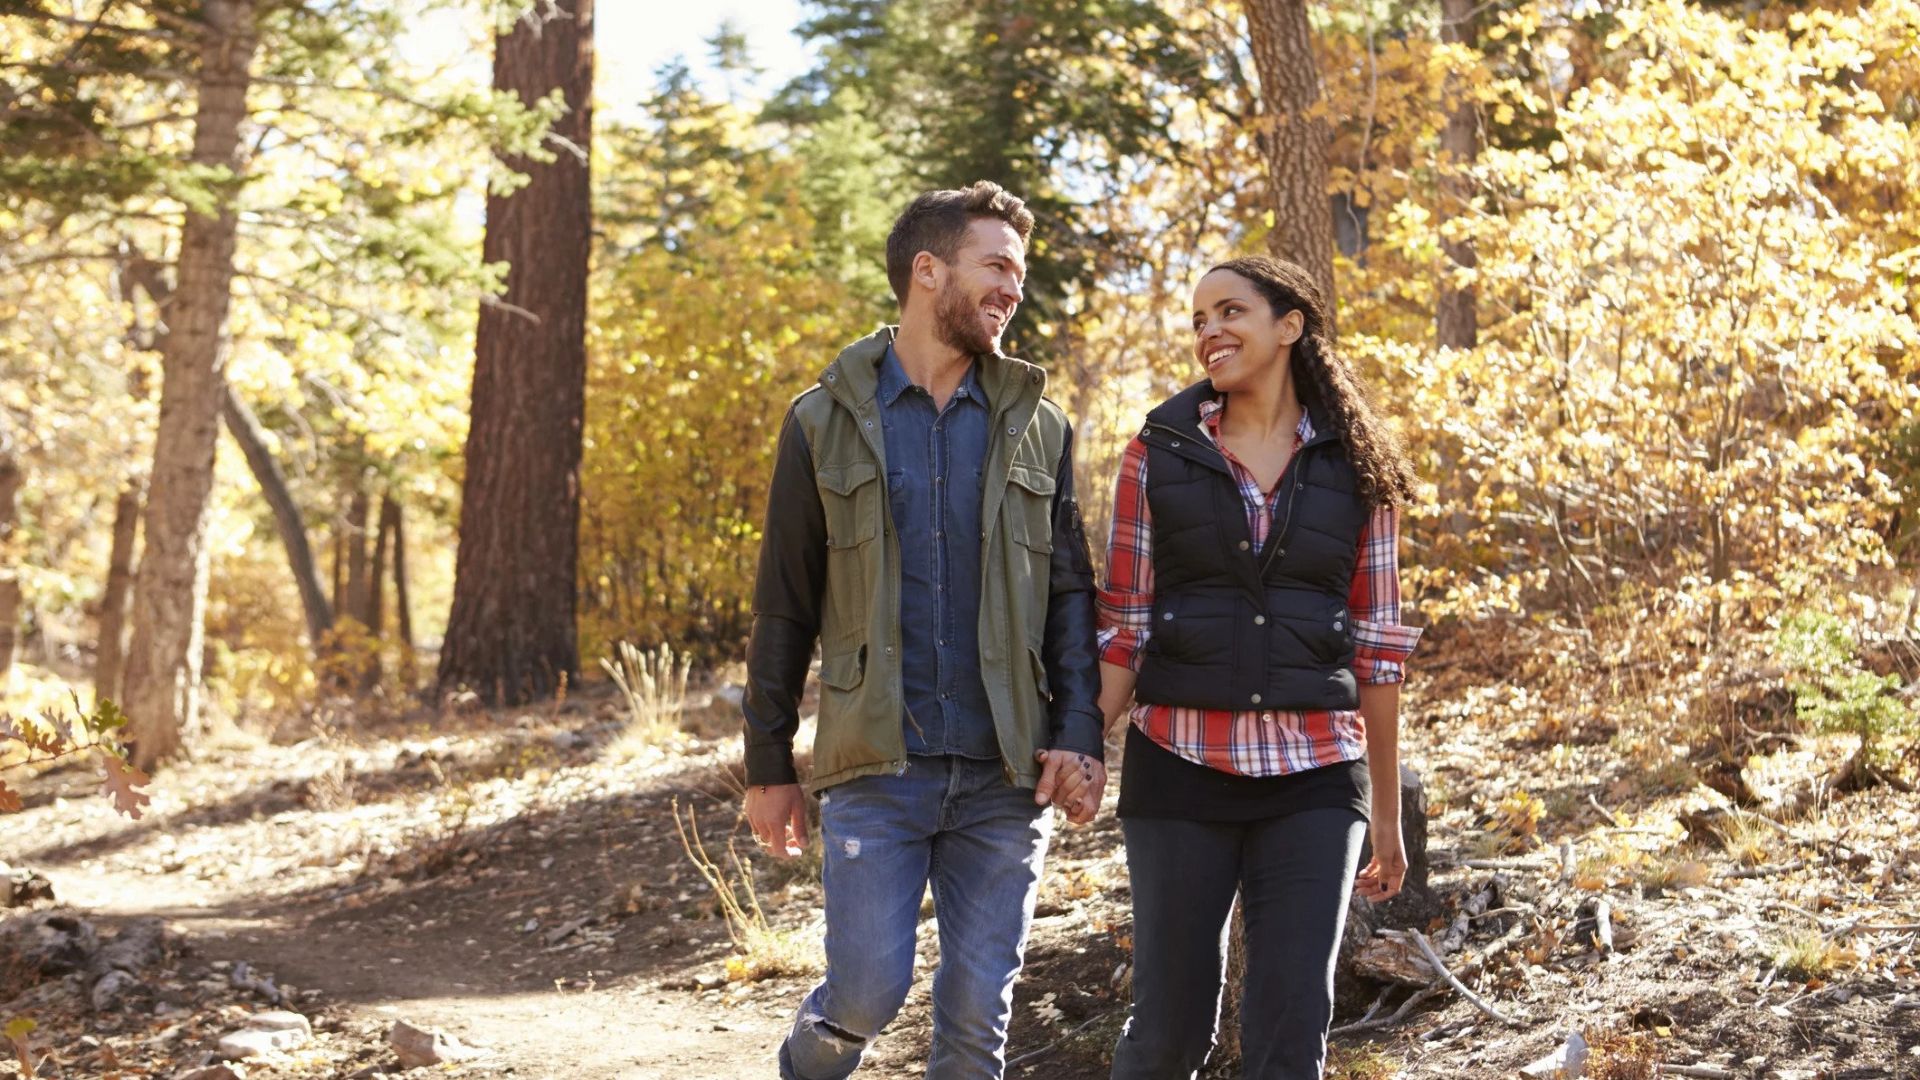 A man and a woman holding hands on a wooded walk surrounded by Fall foliage